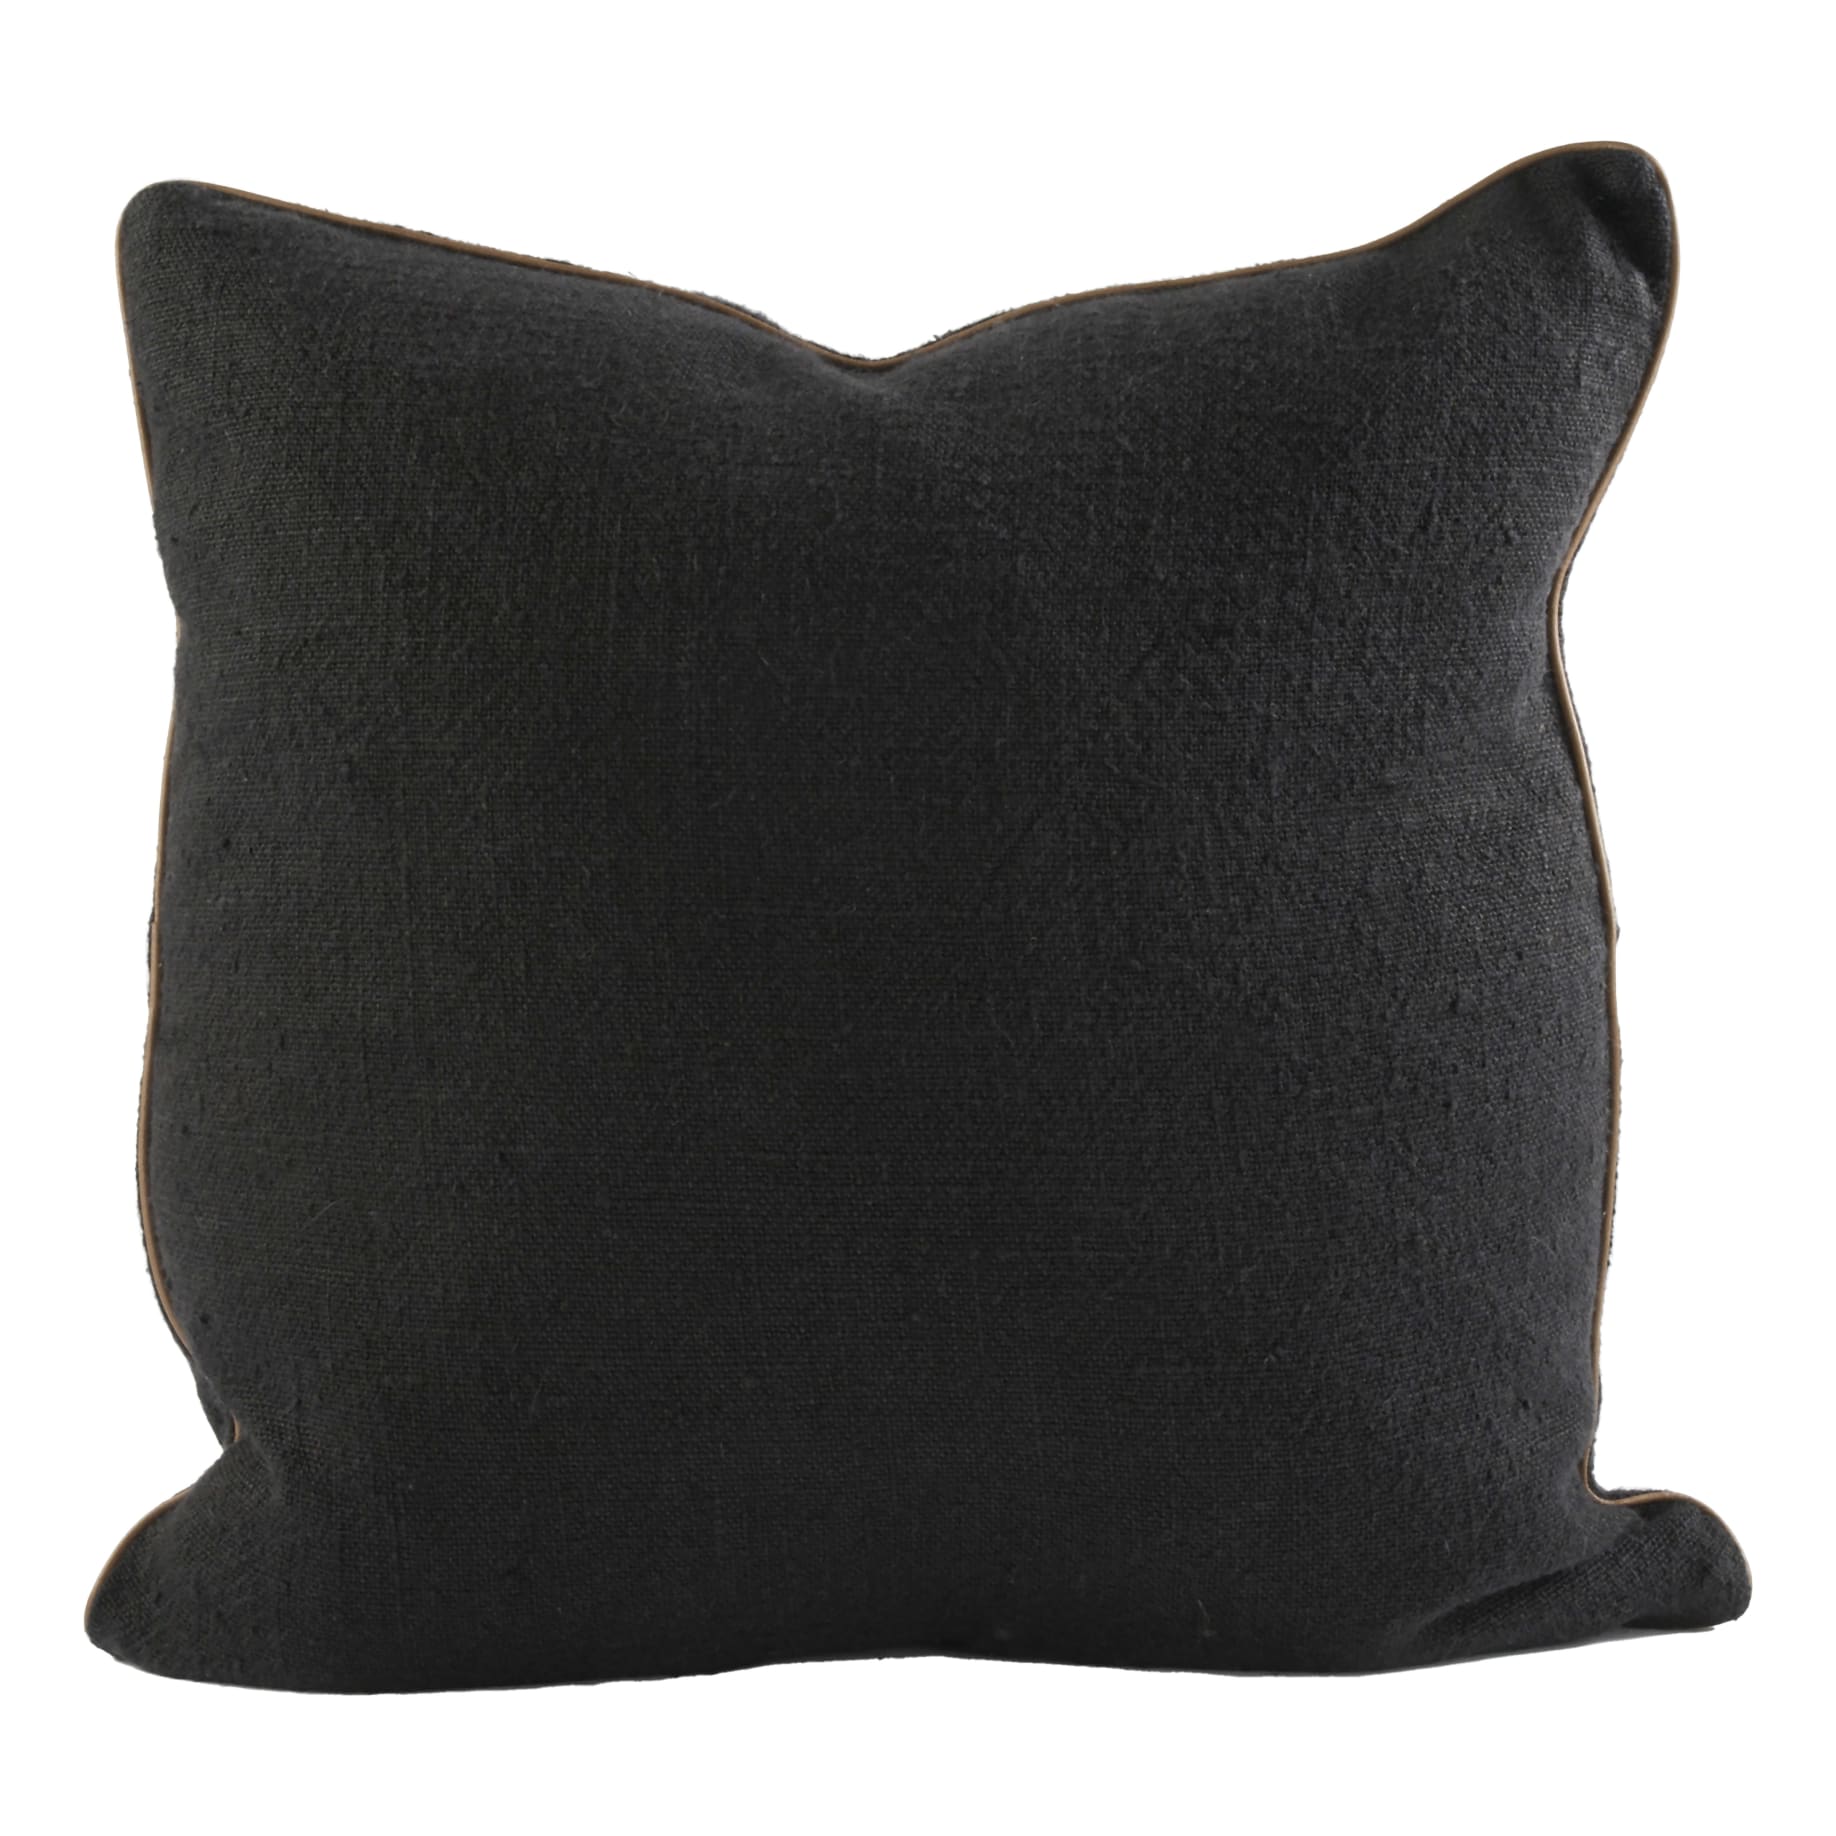 Muse Feather Fill Cushion 50x50cm in Black